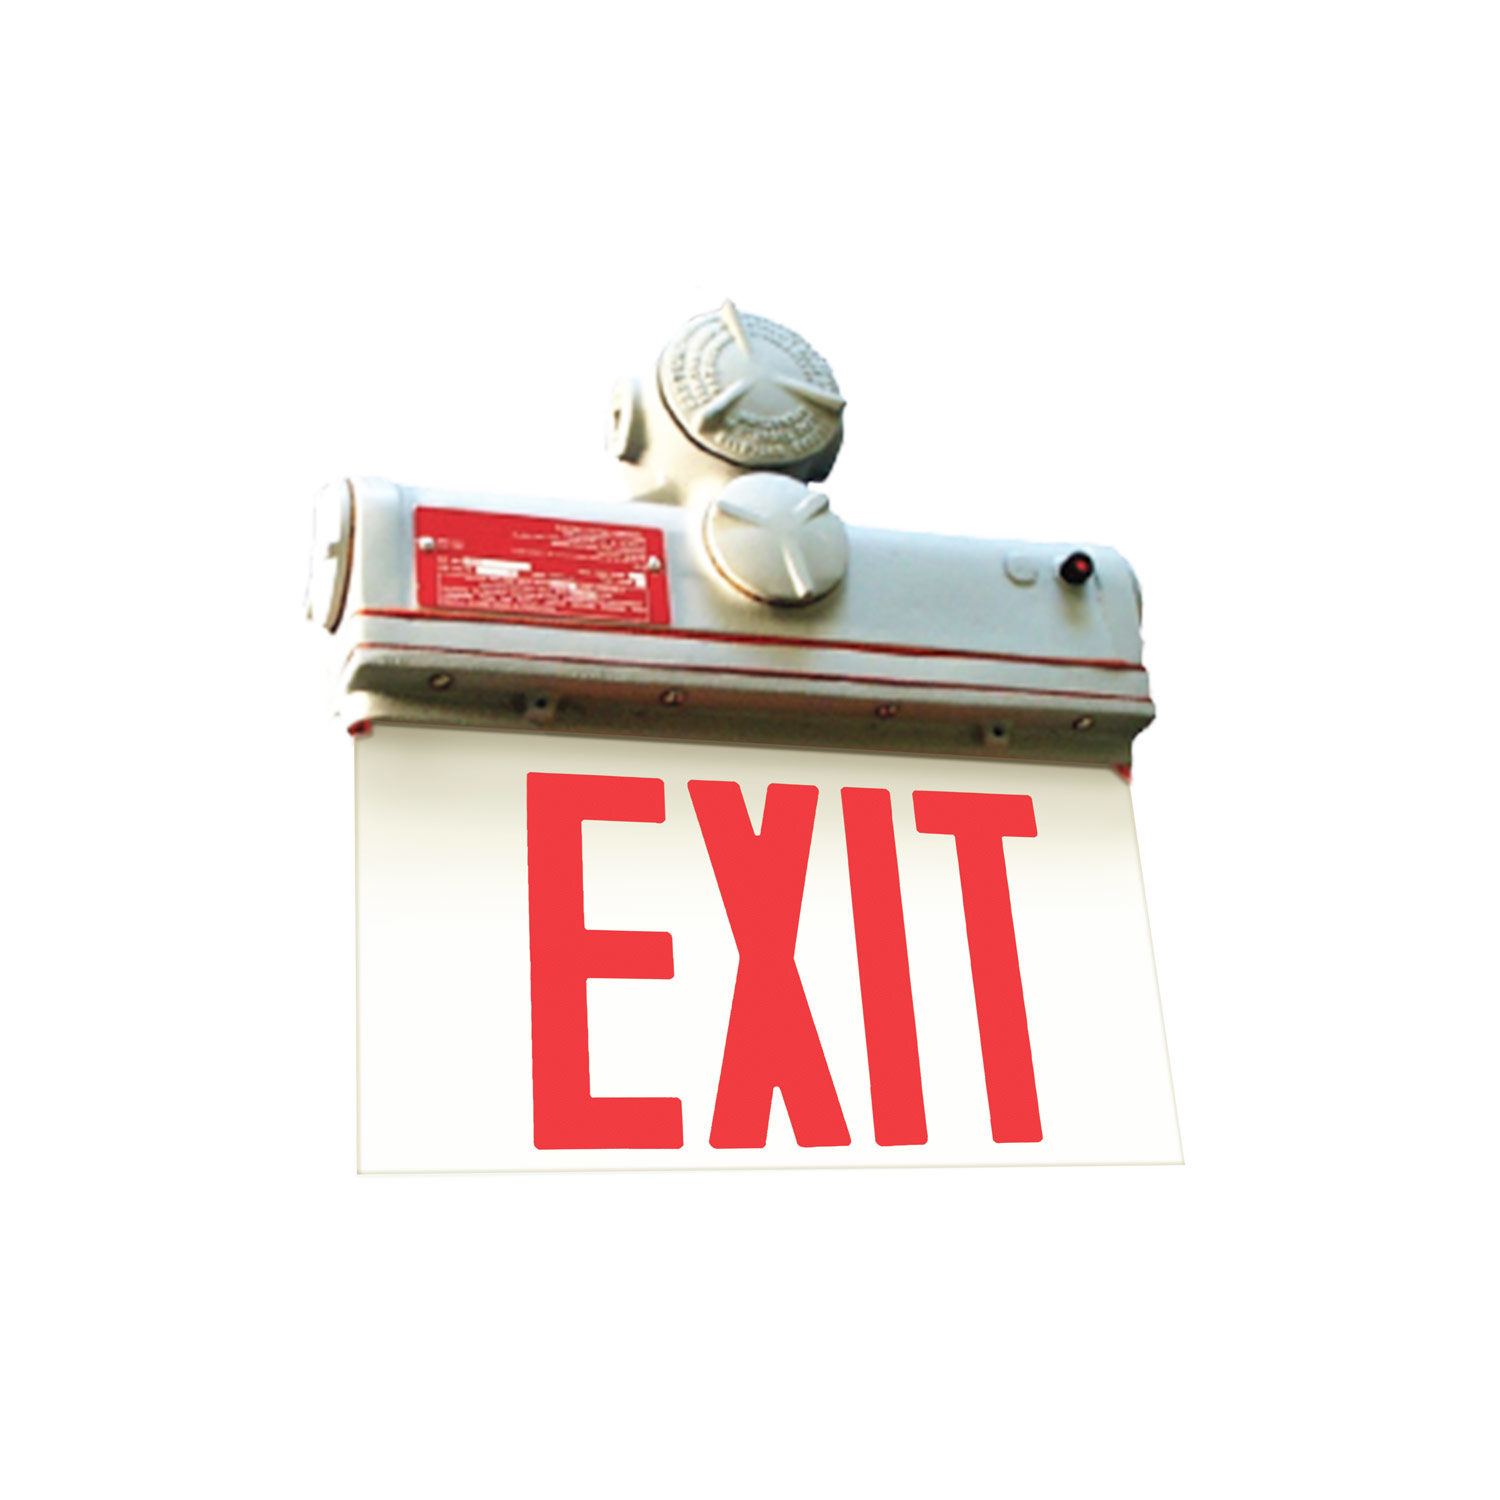 The EXP Explosion Proof LED Exit Sign is designed for hazardous environments and has a zero current low-voltage disconnect.